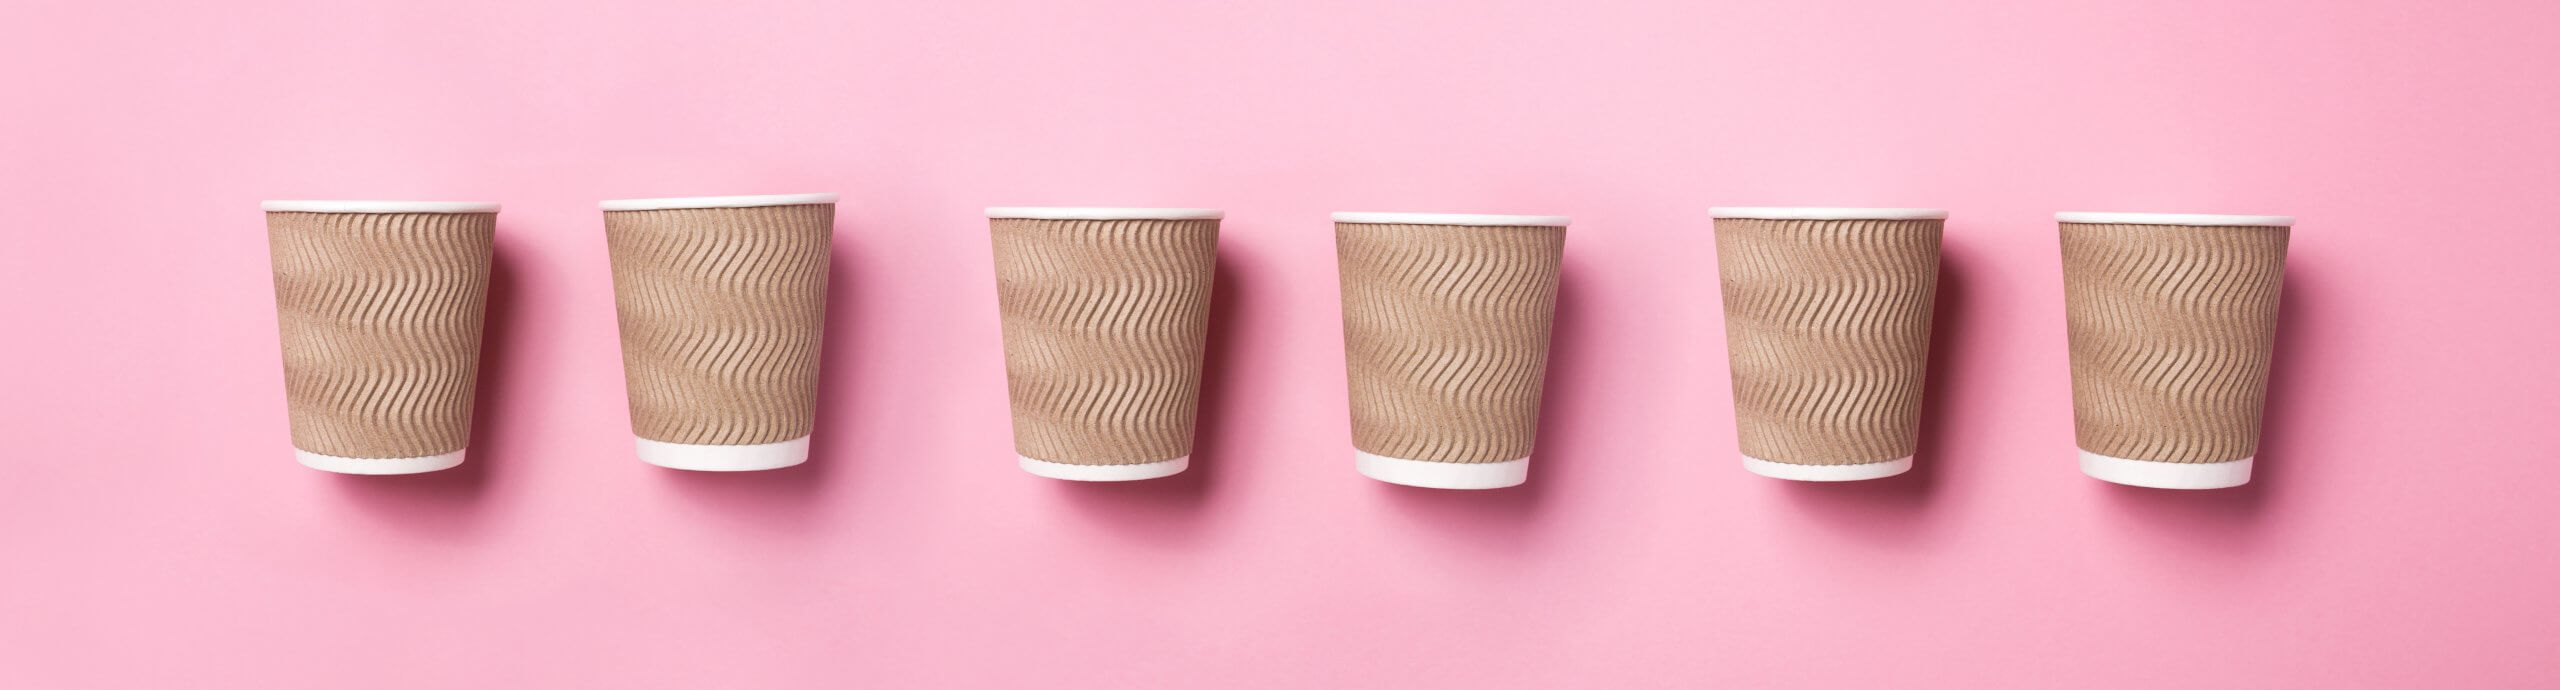 Paper coffee cups on pink background